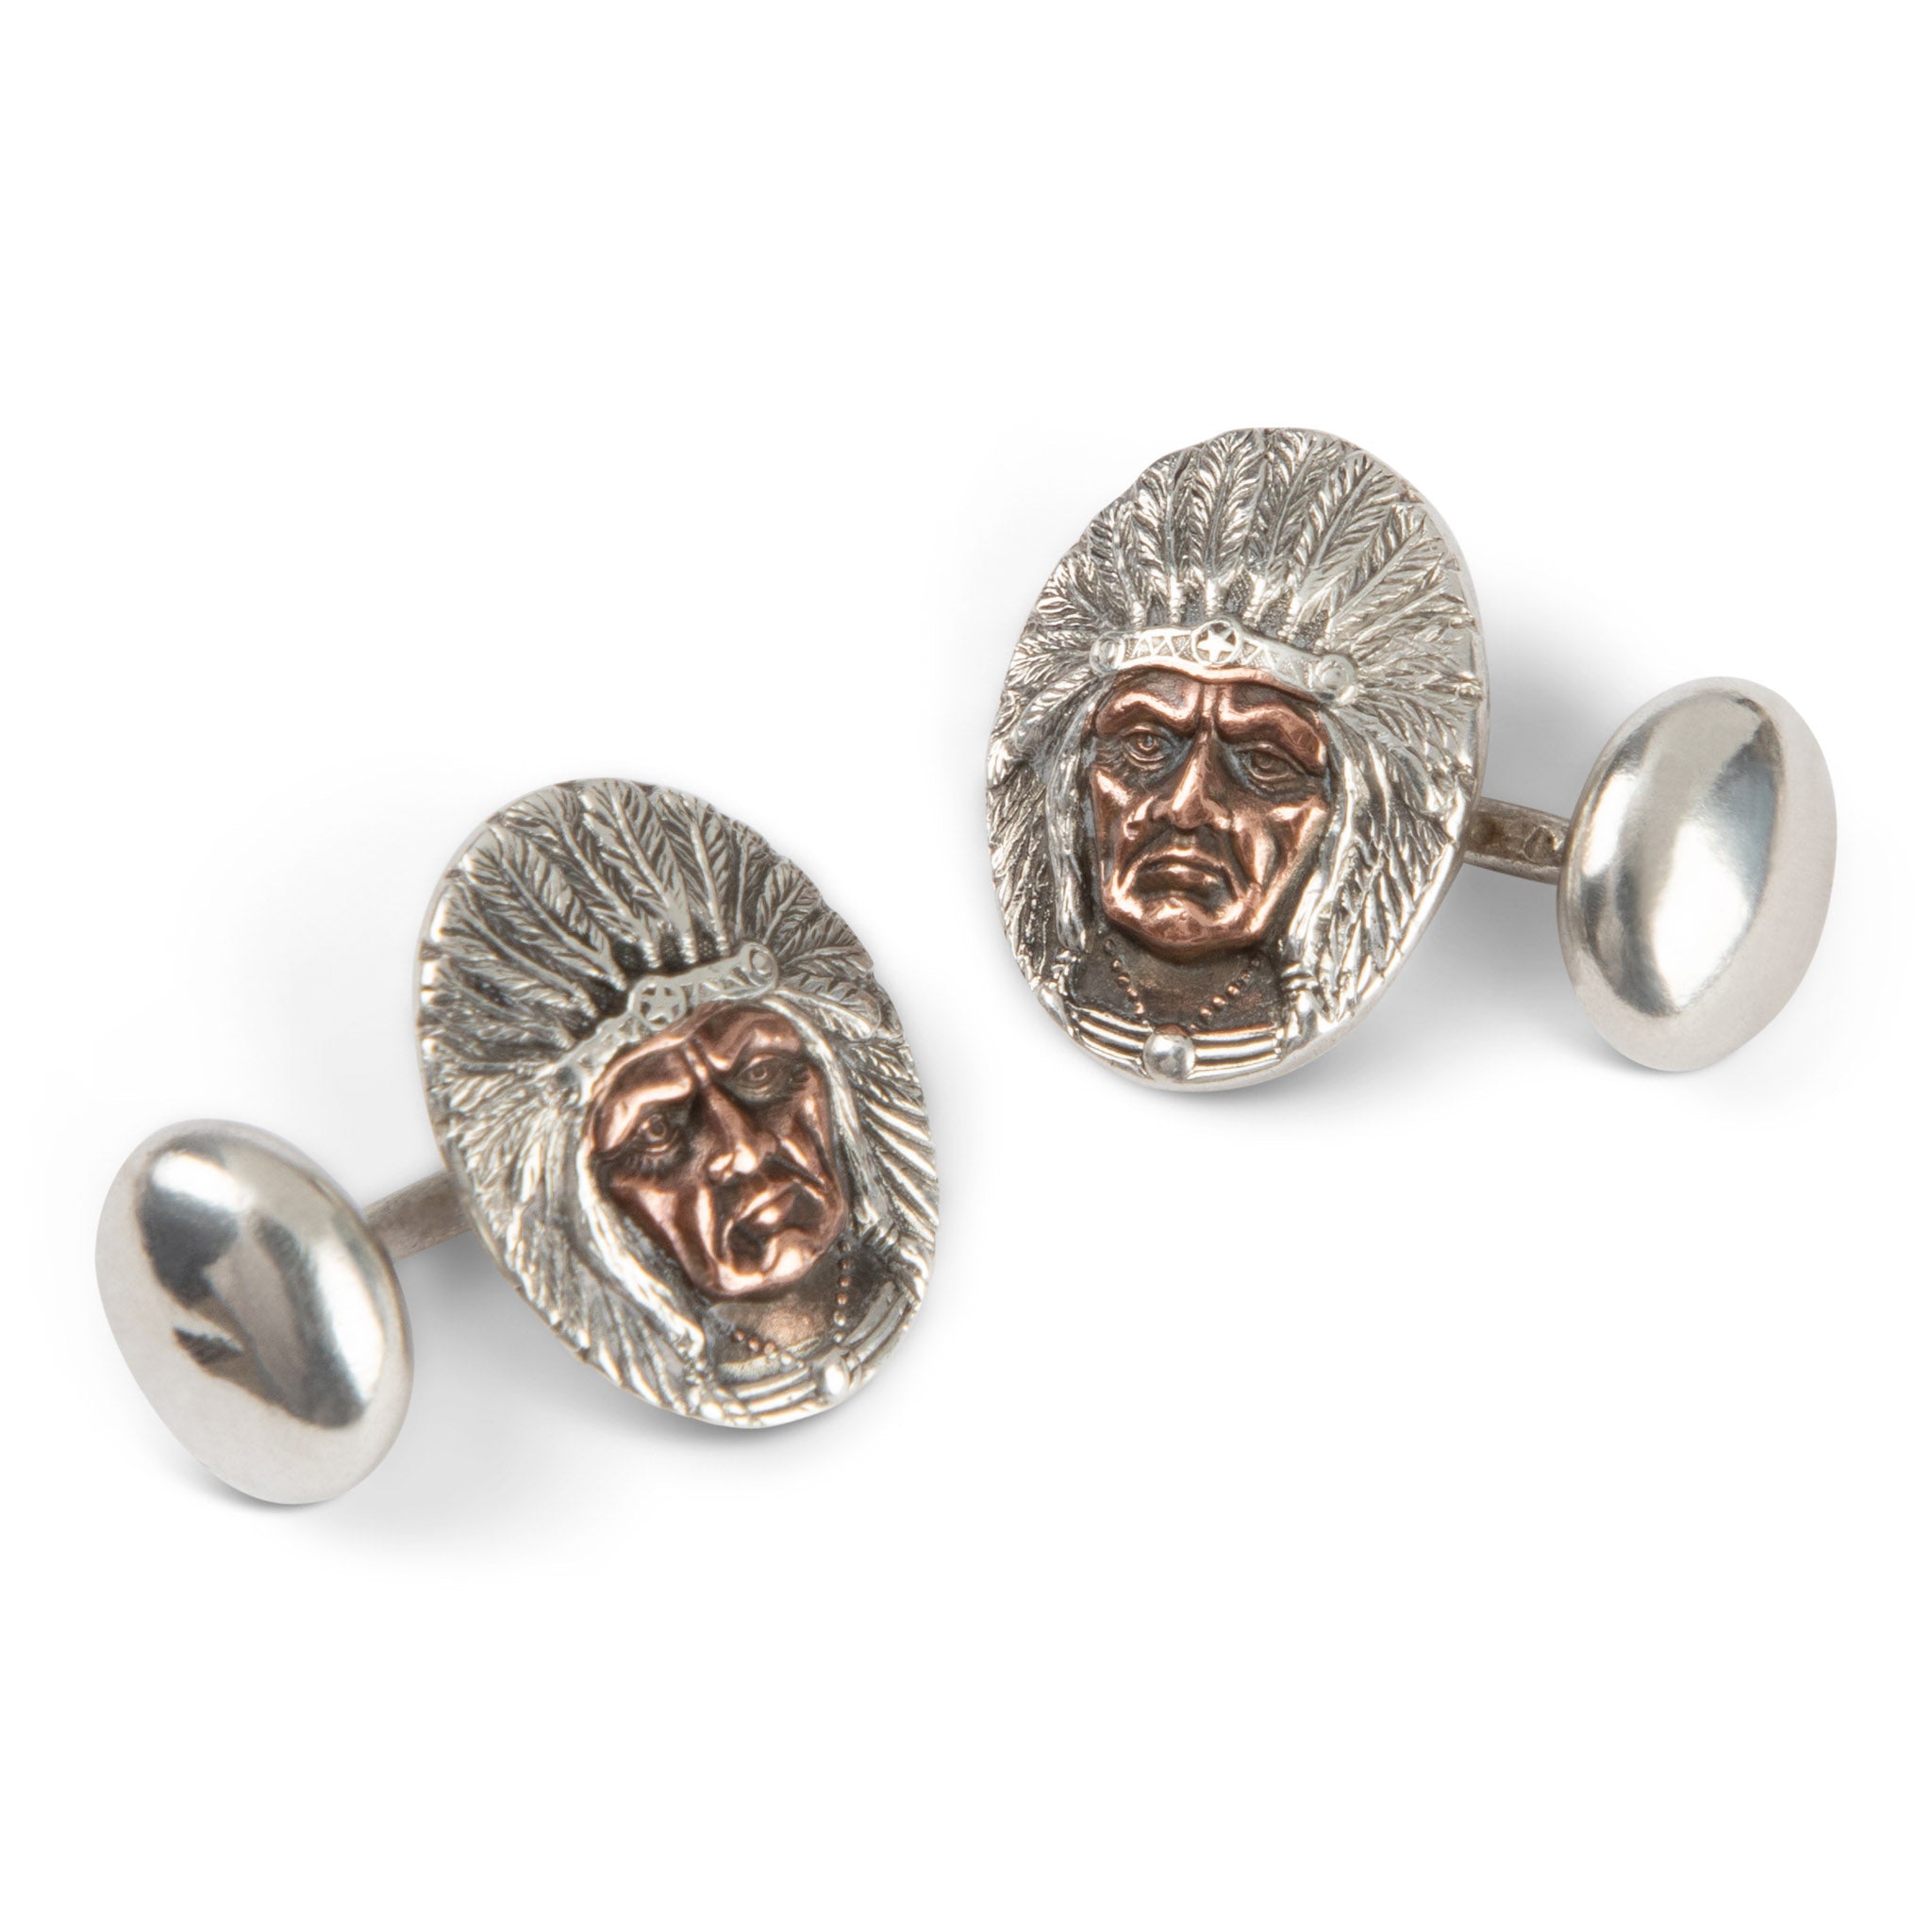 Sterling & Copper Indian Chief Cufflinks